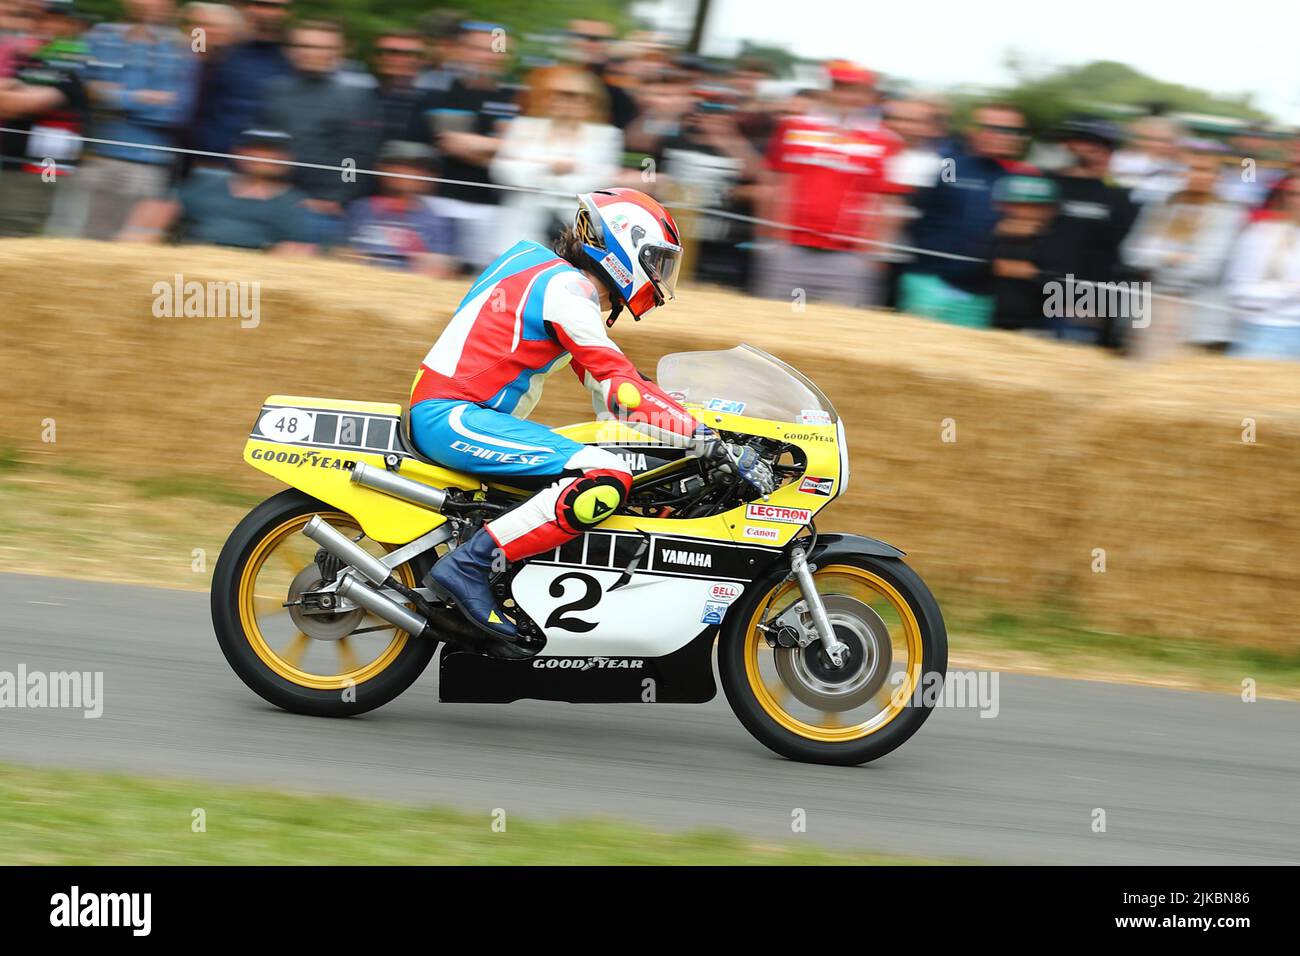 A Yamaha motorbike racing at Festival of Speed 2022, Goodwood, Sussex, UK Stock Photo